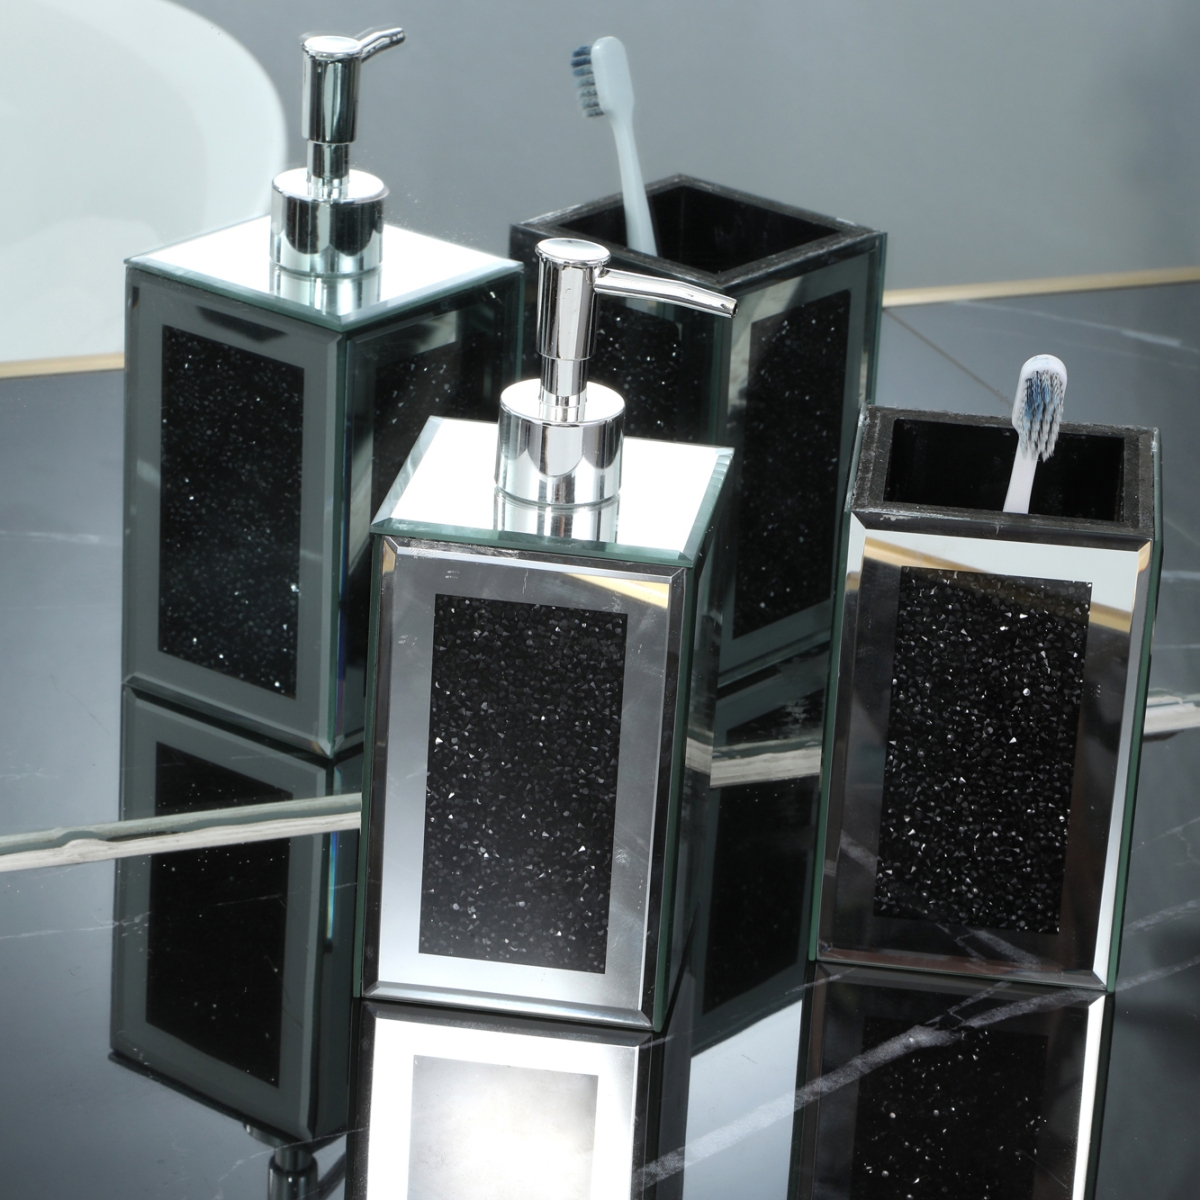 Exquisite 2 Piece Square Soap Dispenser And Toothbrush Holder - Black